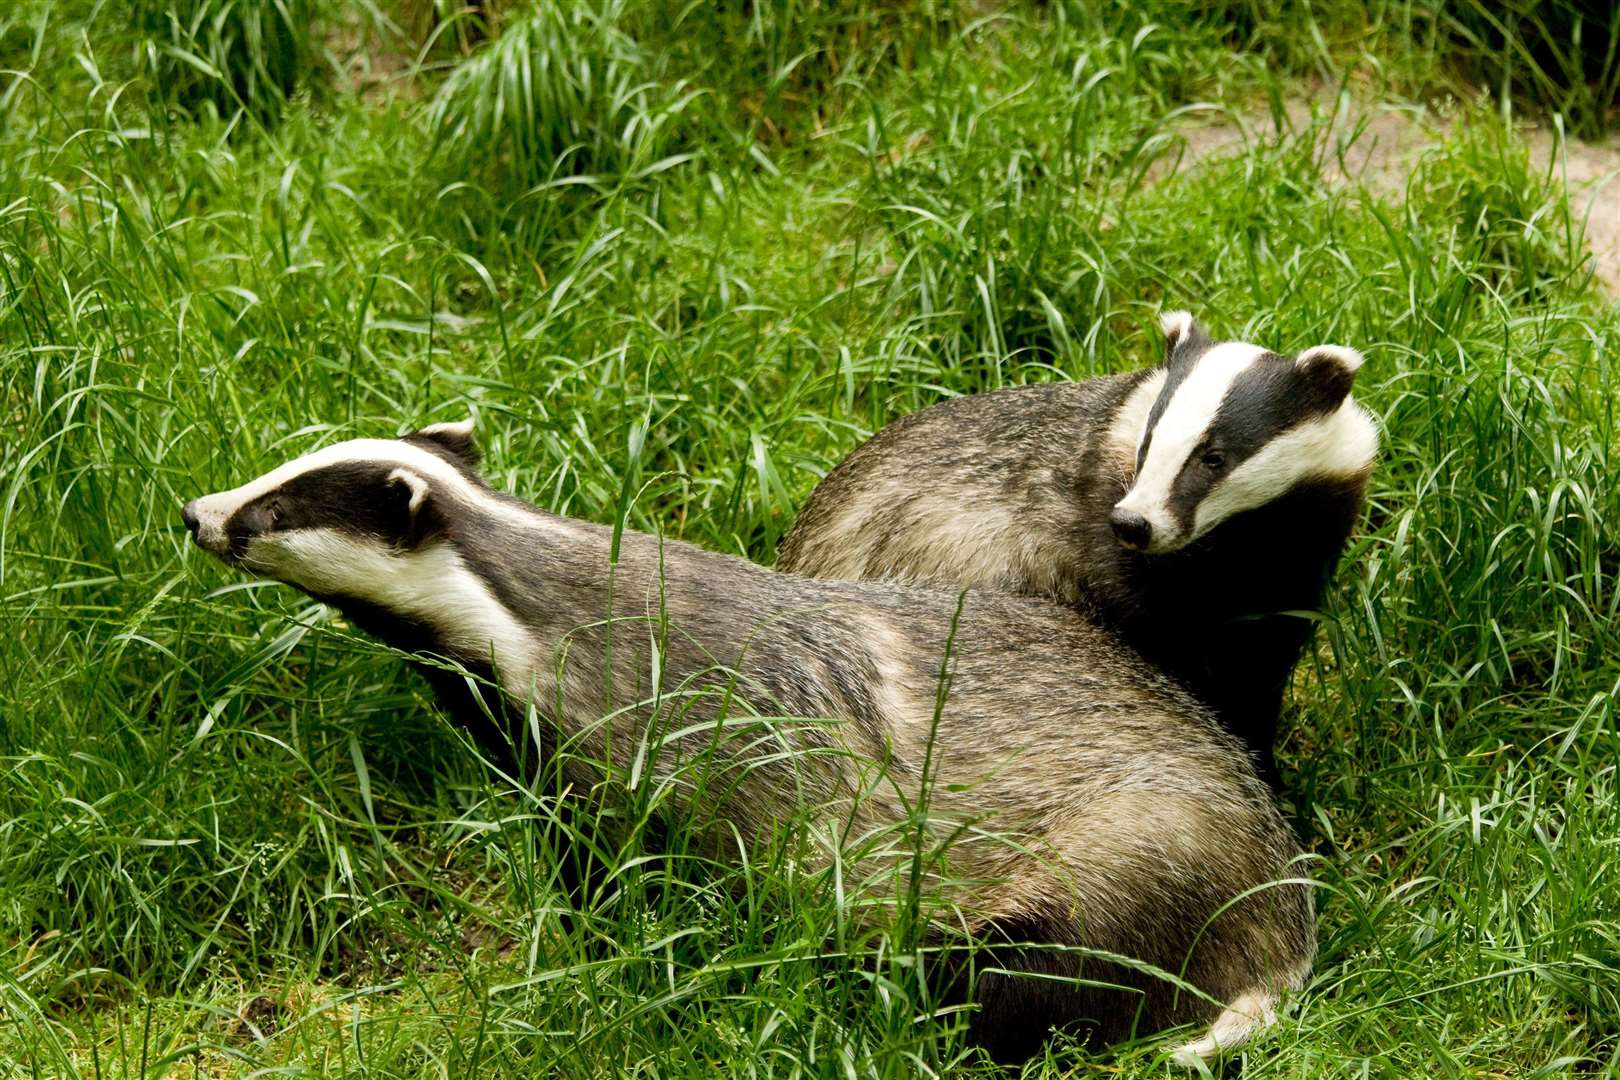 Plans have been revealed to create a new badger sett on the land at Princes Parade